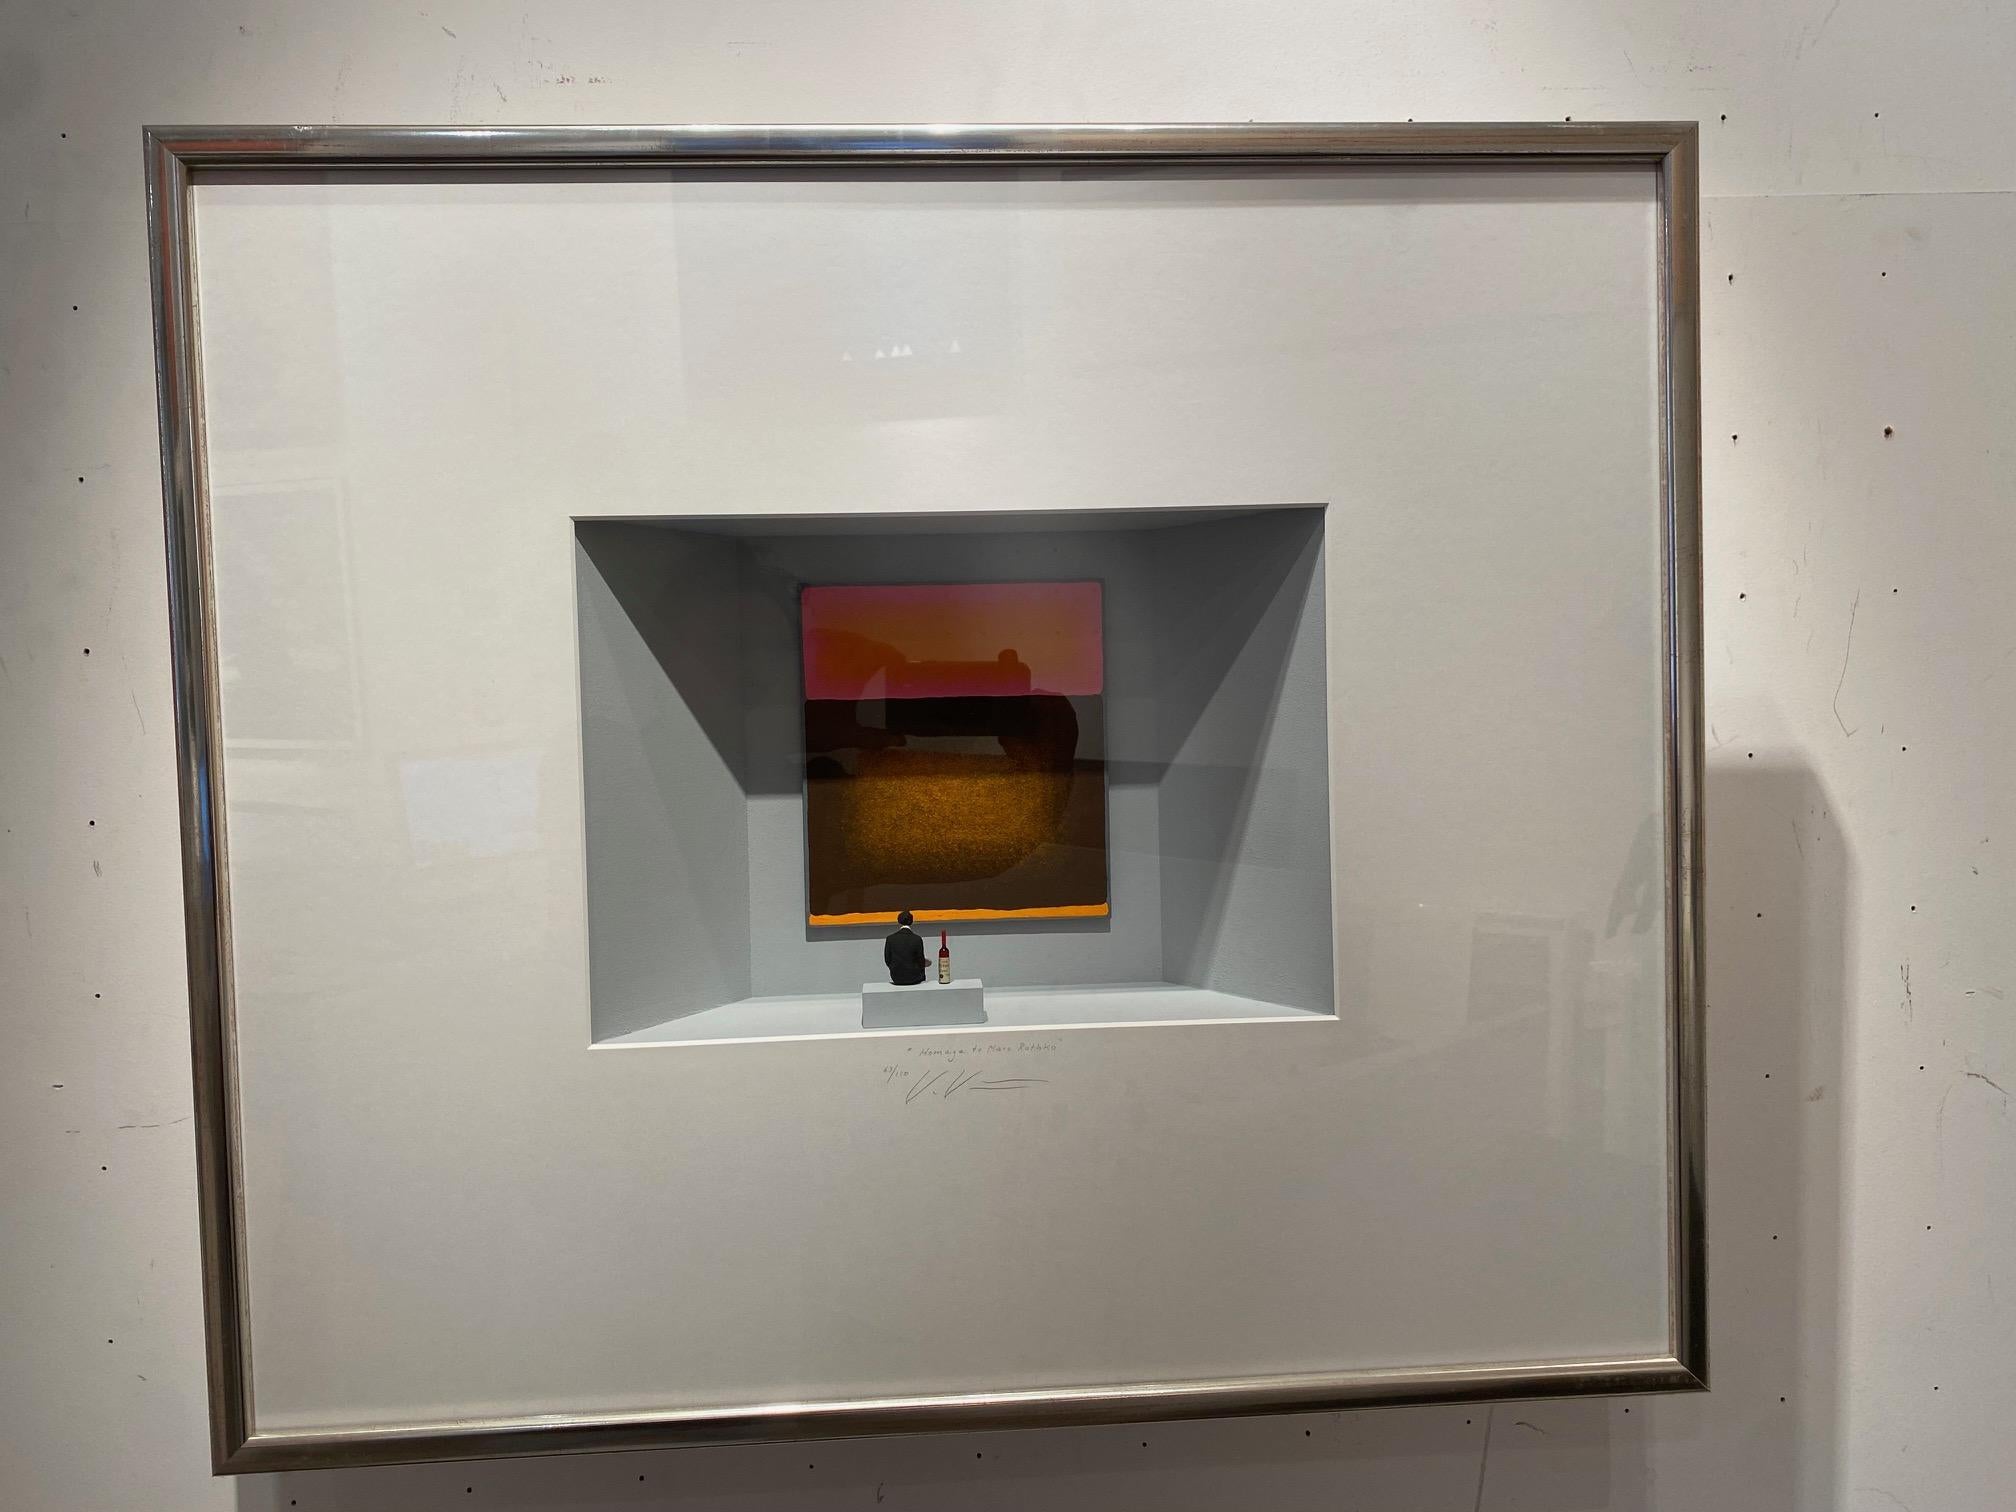 Homage to Rothko-contemporary art in boxes homage to Marc Rothko by Volker Kuhn For Sale 2